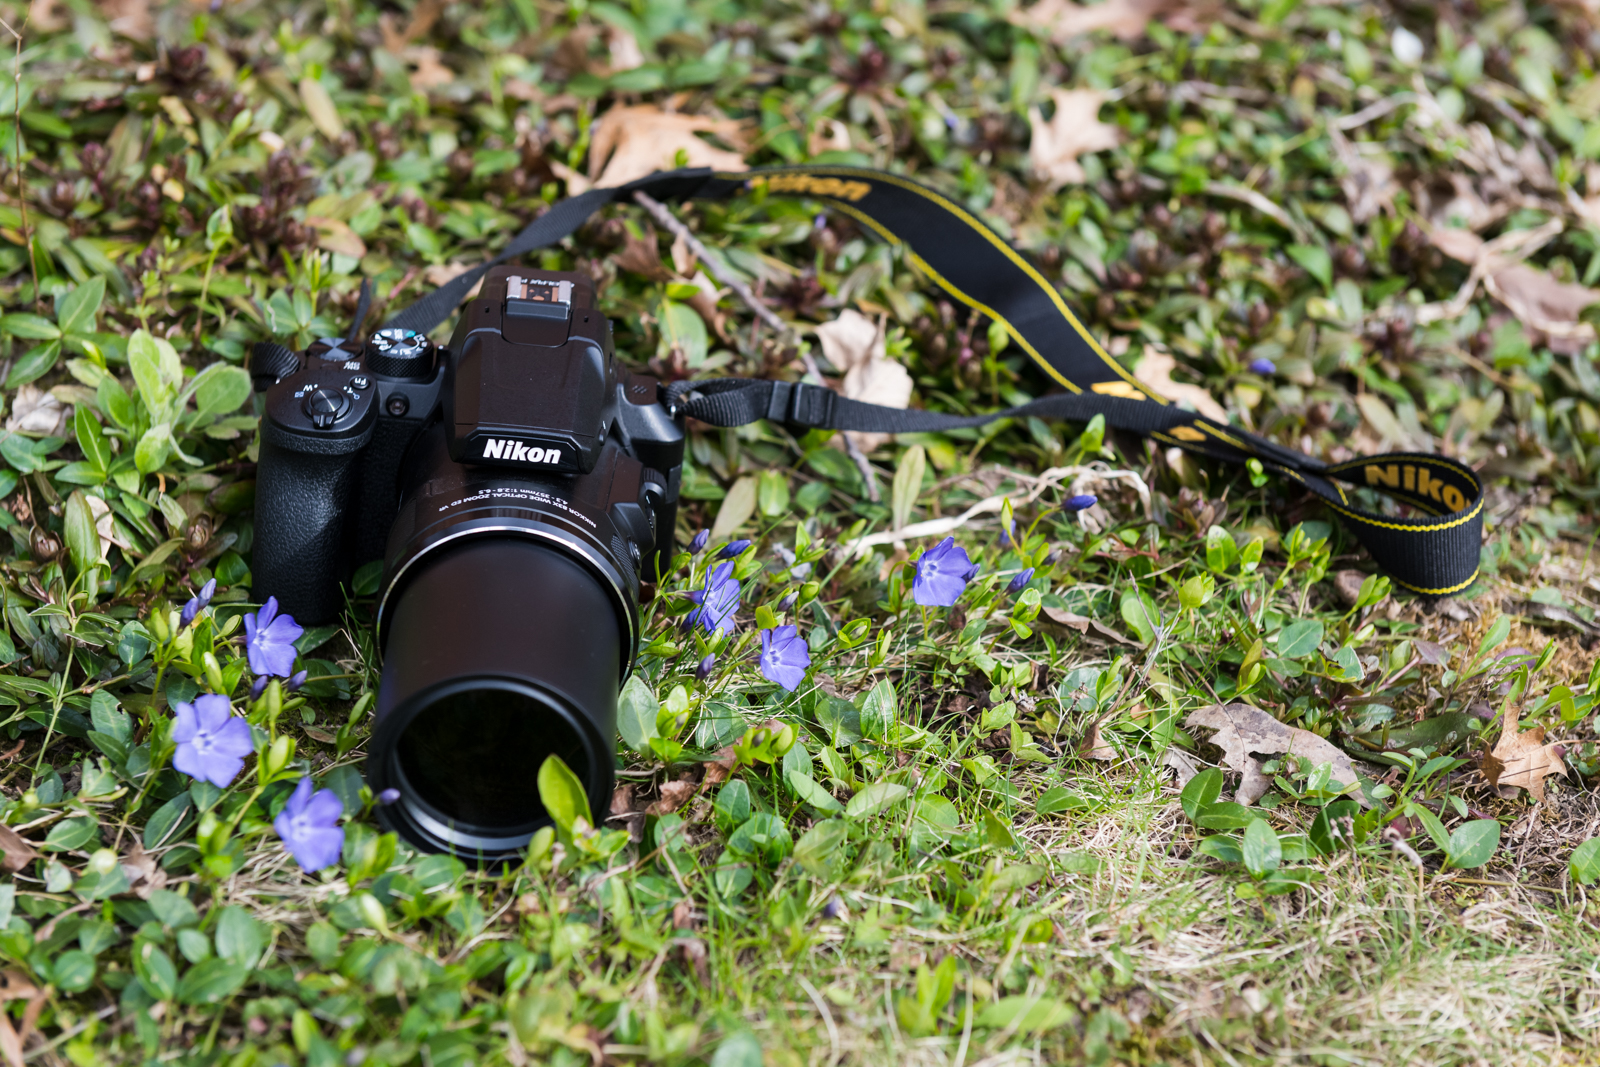 Nikon Coolpix P950 Review: Epic Zoom That's Easy to Use | Digital